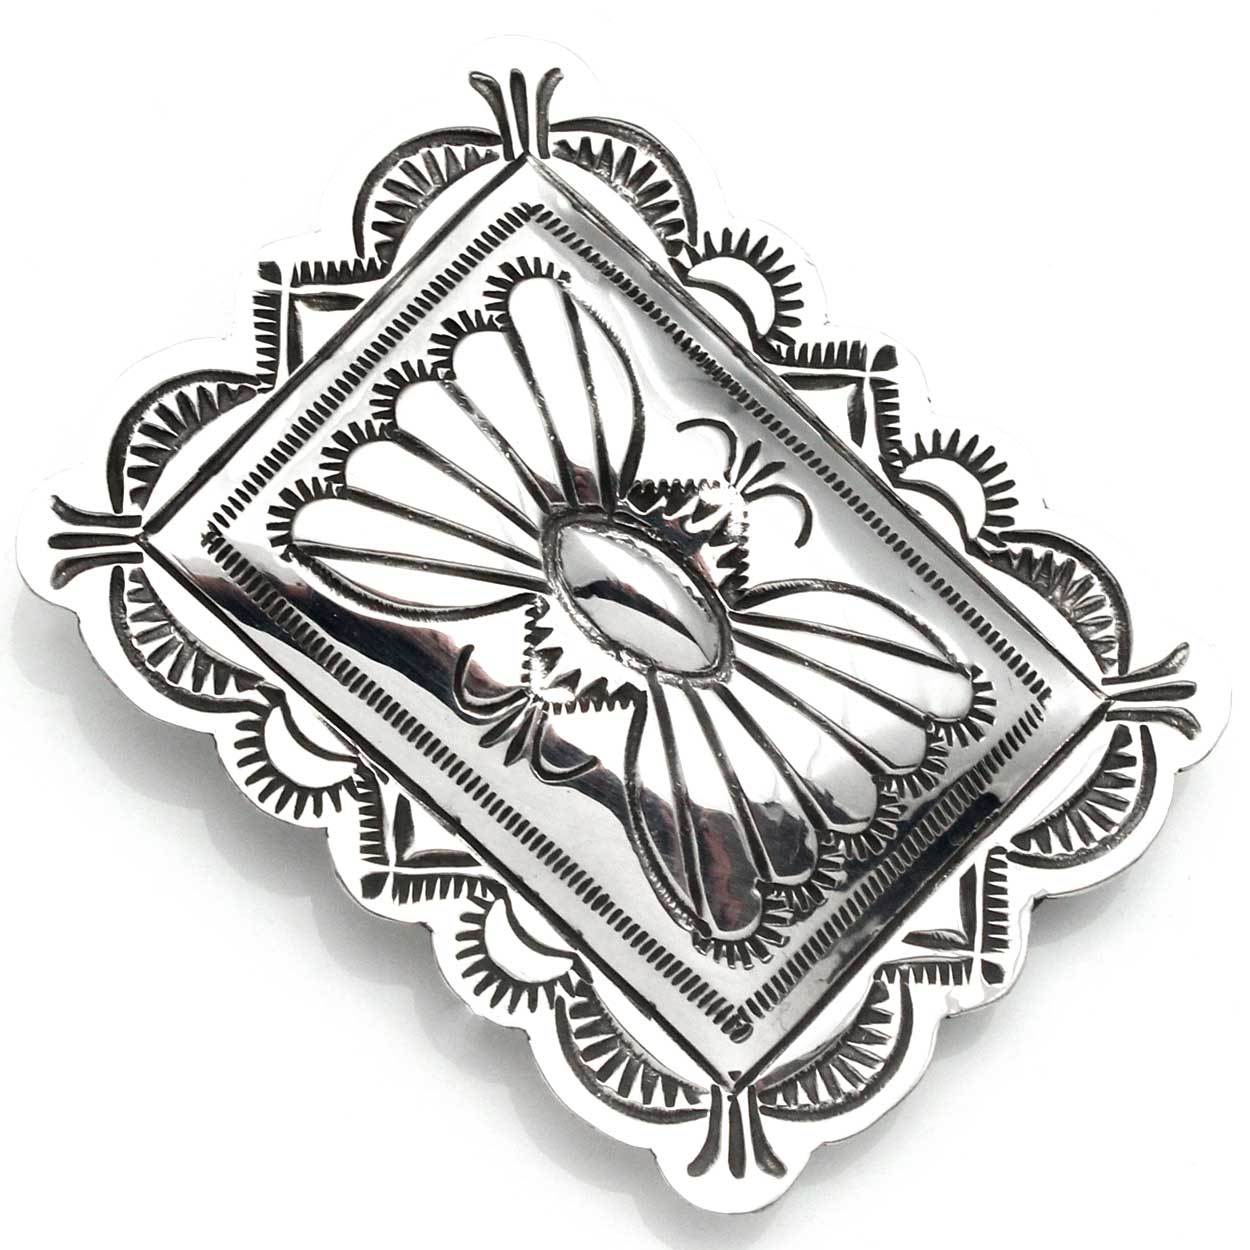 Navajo Rectangular Stamped Silver Money Clip By Blackgoat